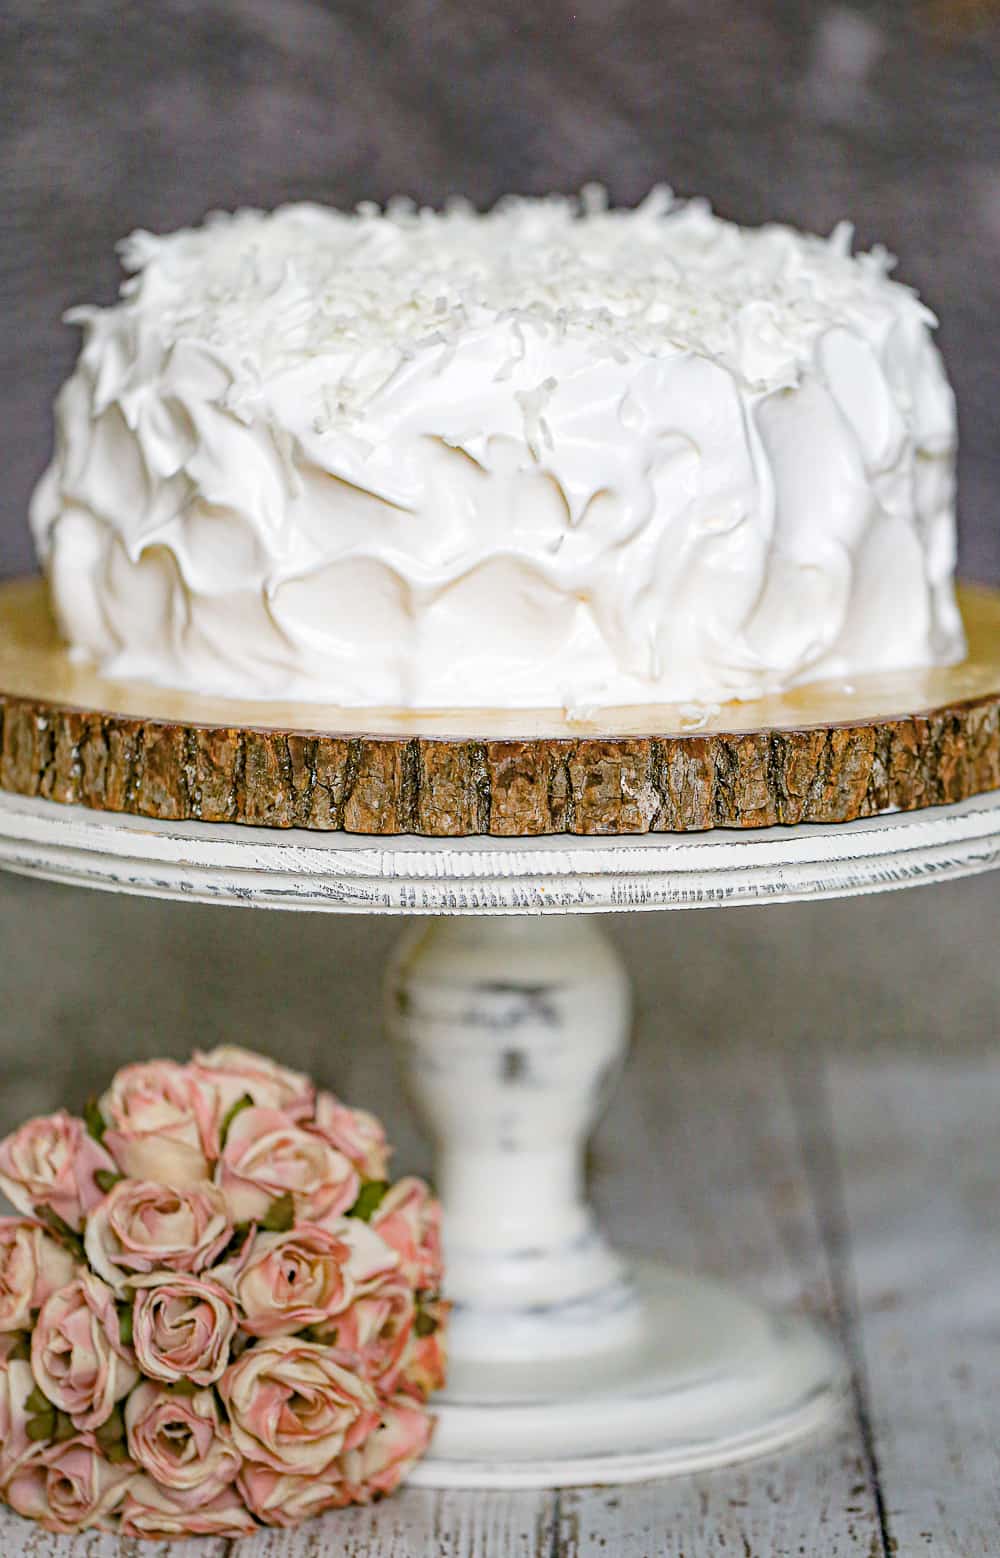 Coconut cake with marshmallow frosting on a cake stand.